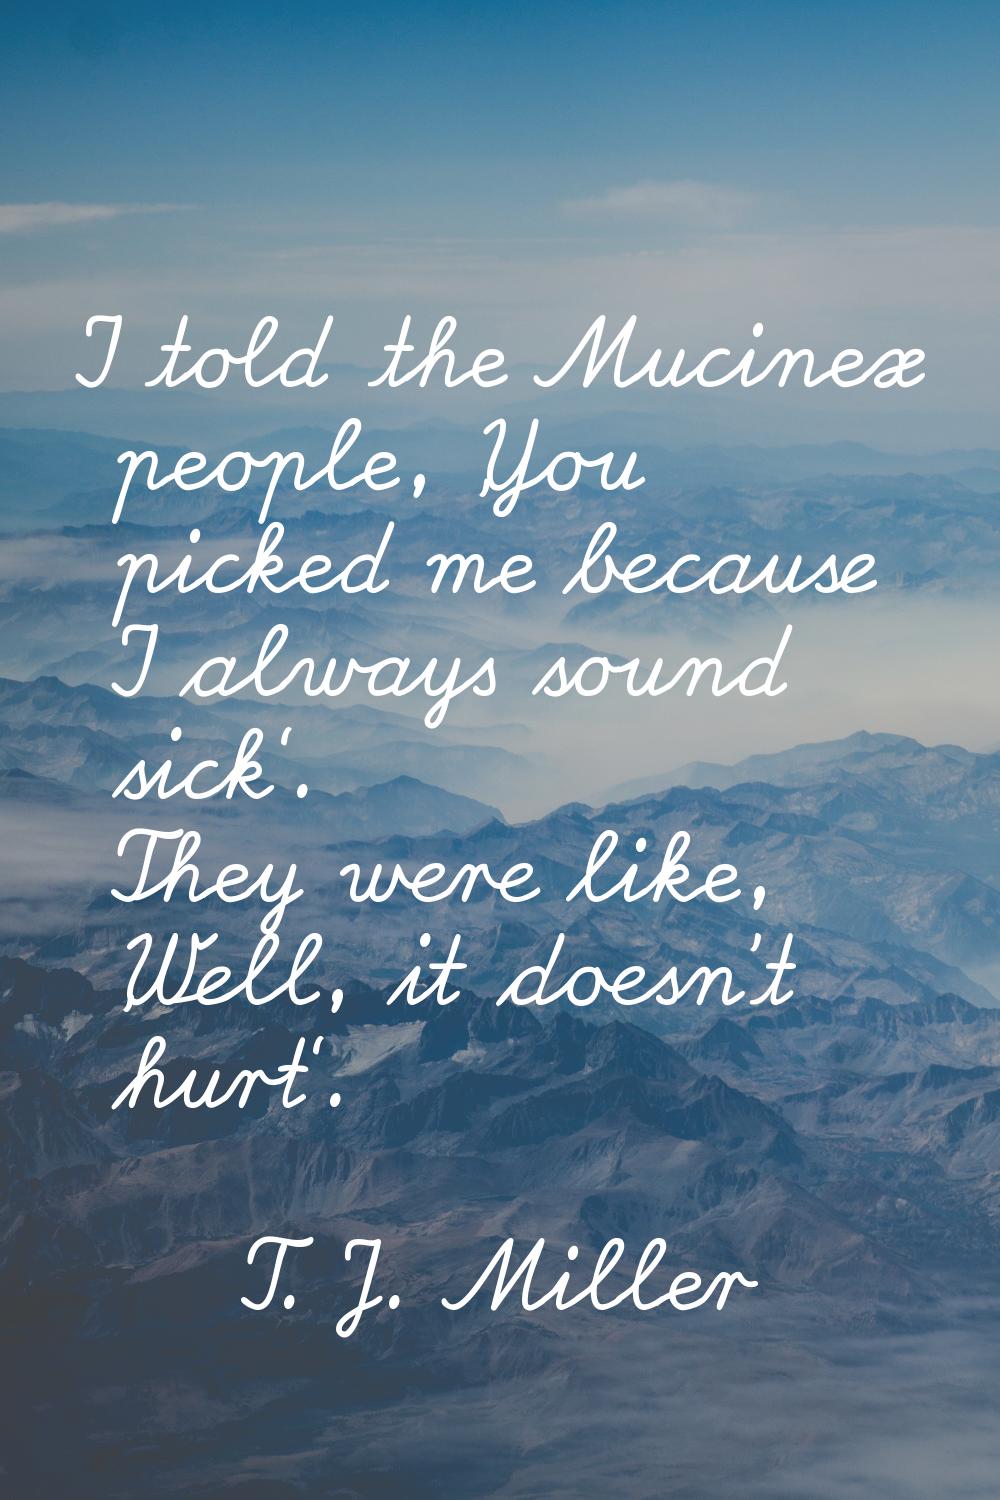 I told the Mucinex people, 'You picked me because I always sound sick'. They were like, 'Well, it d